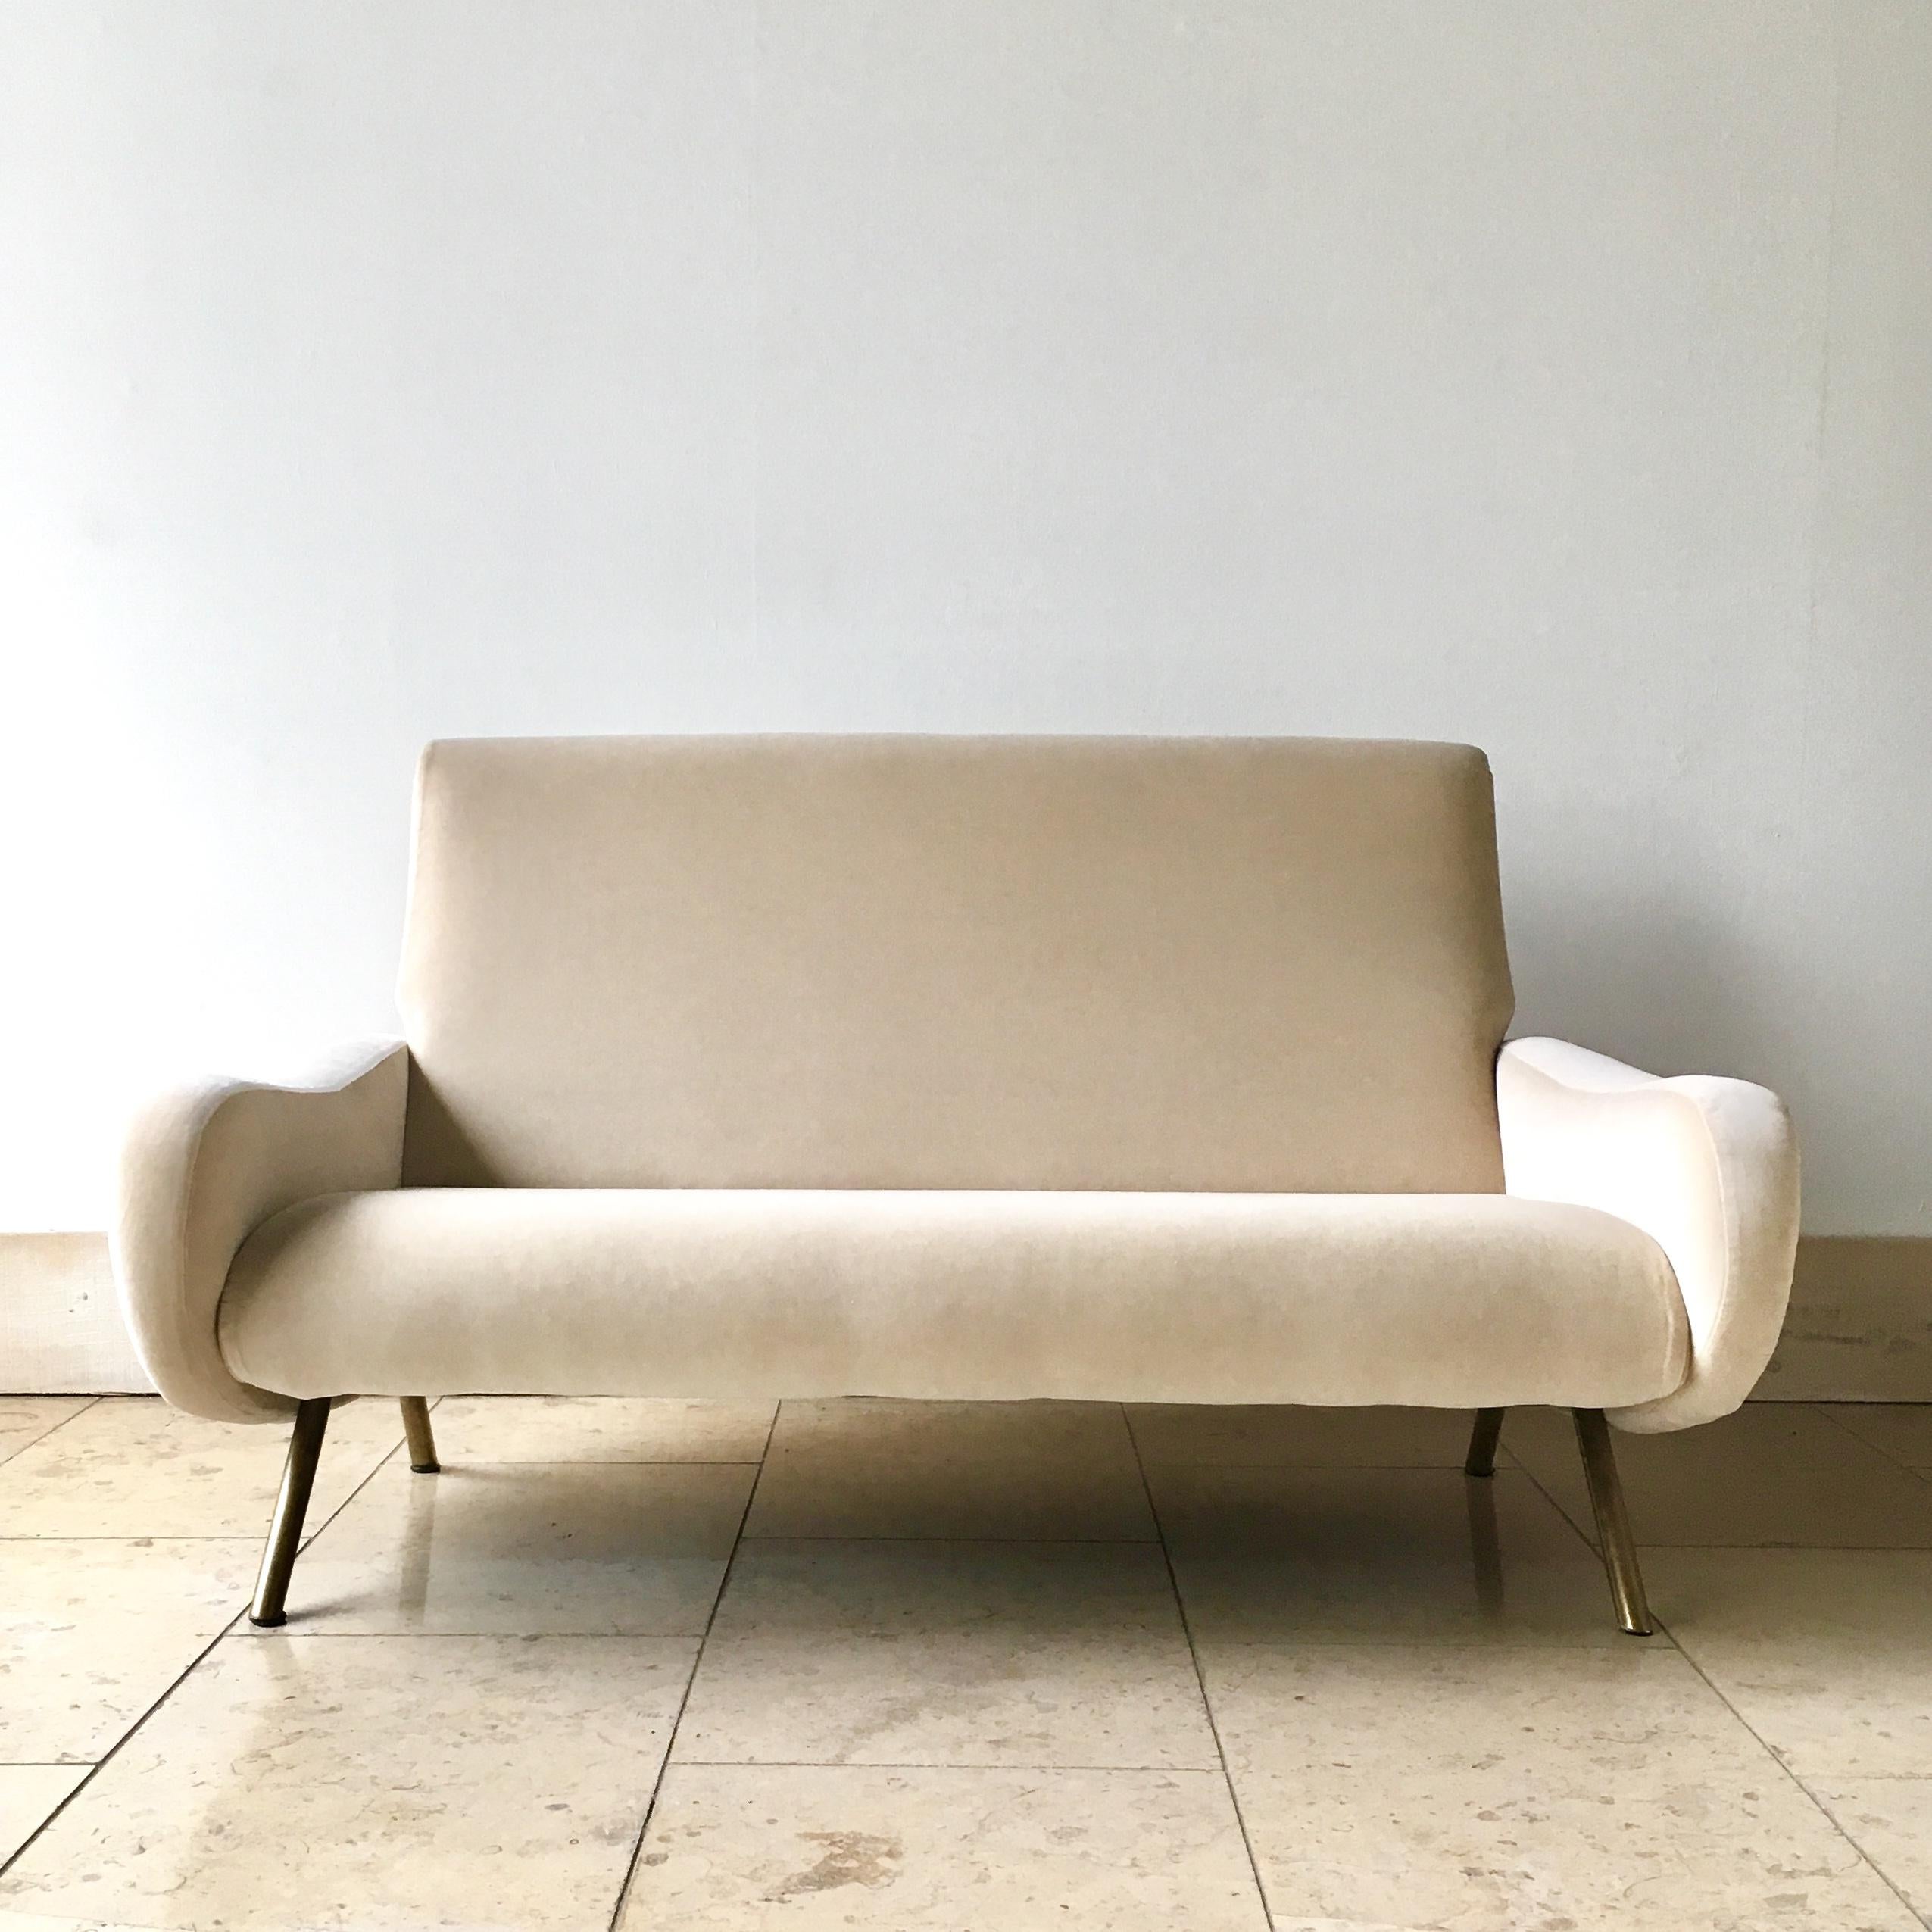 An early production two seater sofa model 'Lady' designed by Marco Zanuso for Arflex Edition 1951 set on brass tubular legs.


Marco Zanuso was an Italian architect and designer who worked with Arflex during the early 1950s designing furniture